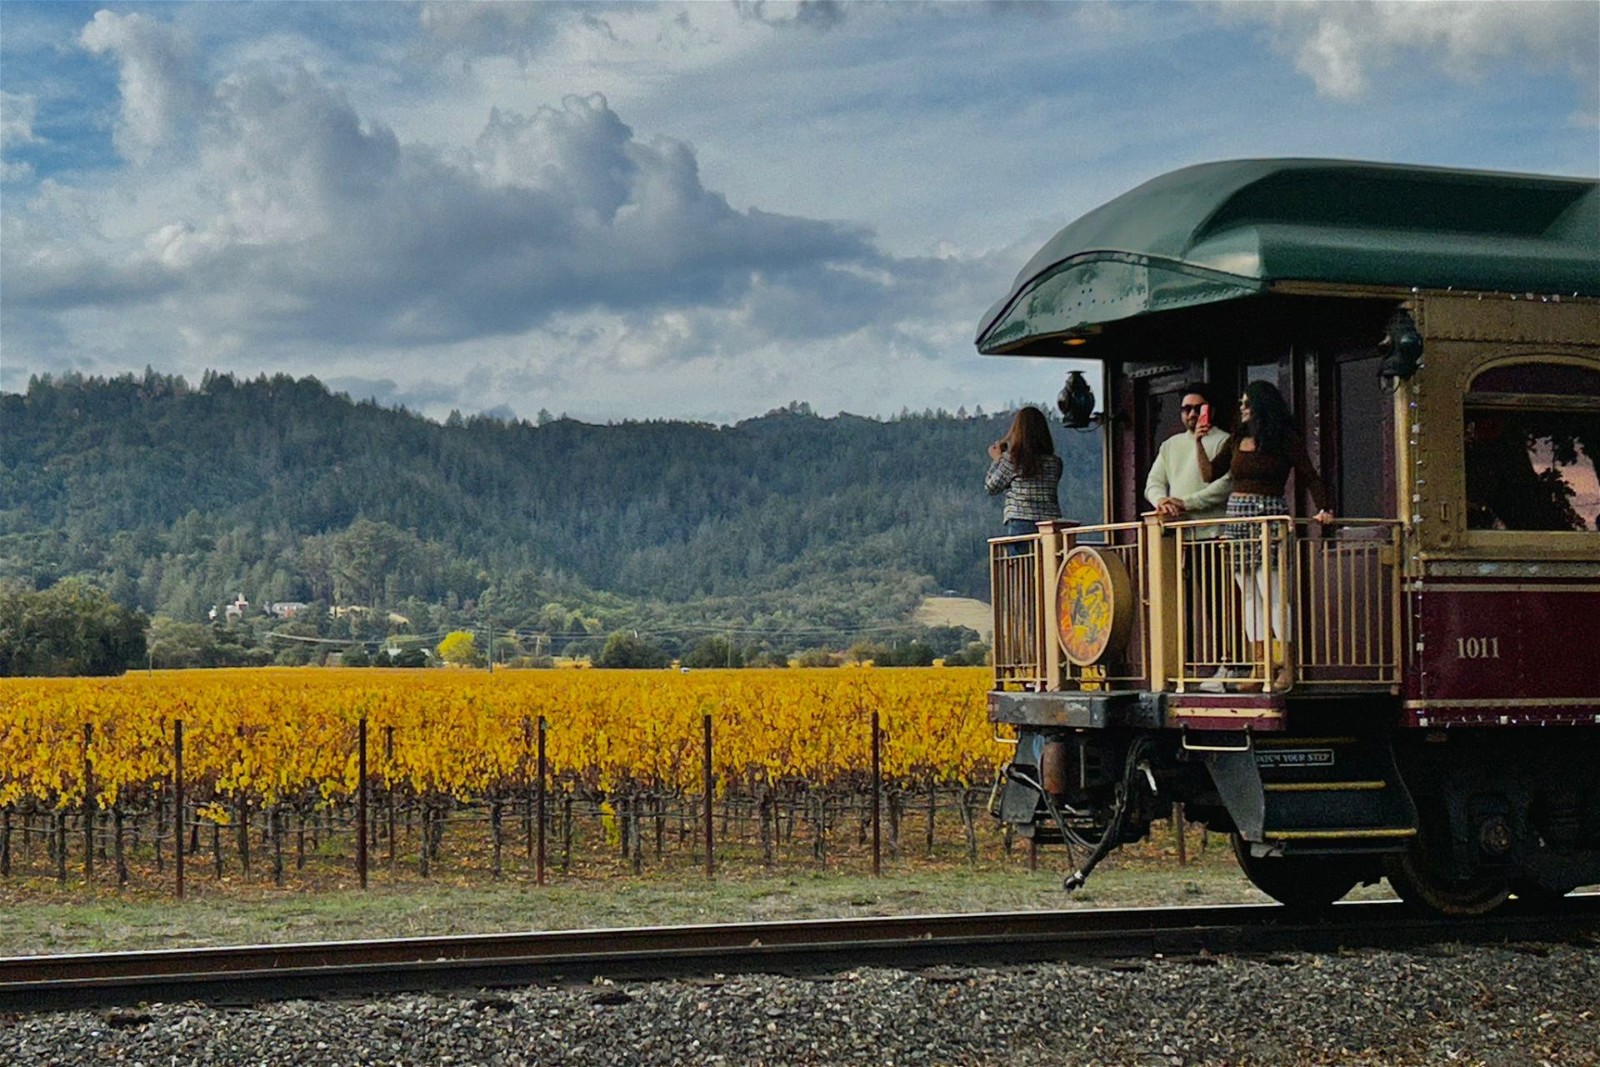 Features of Napa Valley Railroad (Wine Train):